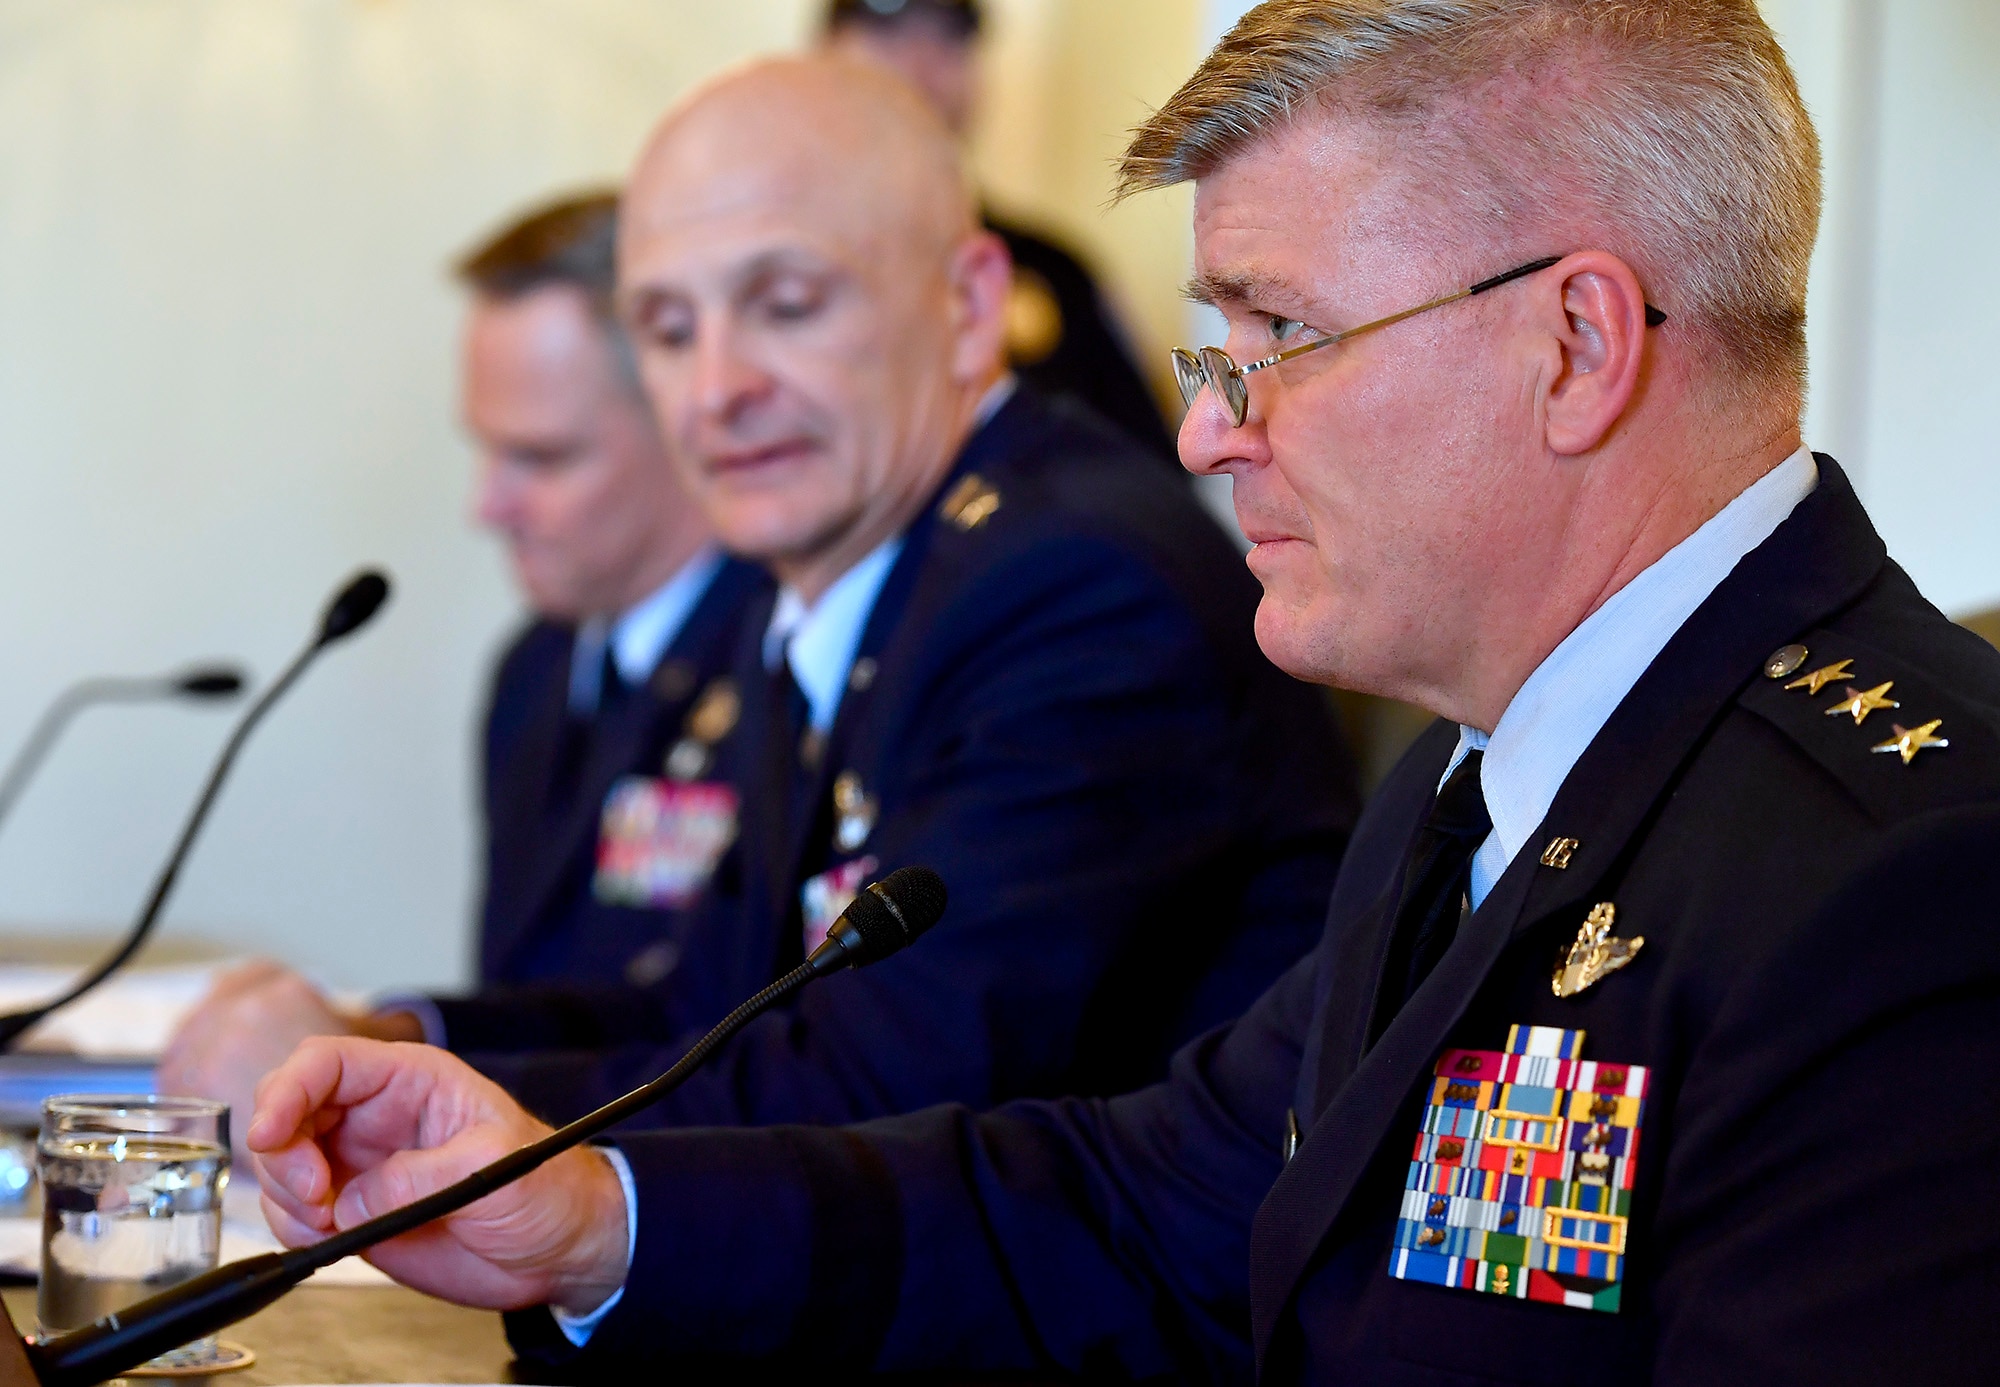 Lt. Gen. Jerry Harris Jr., right, the Air Force deputy chief of staff for Strategic Plans, Programs and Requirements; testifies during the Senate Armed Services Subcommittee on Tactical Air and Land Forces and Air Force Modernization, March 29, 2017, in Washington, D.C.  Also testifying were Lt. Gen Arnold Bunch Jr., center, the military deputy for the Office of the Assistant Secretary of the Air Force; and Lt. Gen. Mark Nowland, the Air Force deputy chief of Staff for Operations. (U.S. Air Force photo/Scott M. Ash)